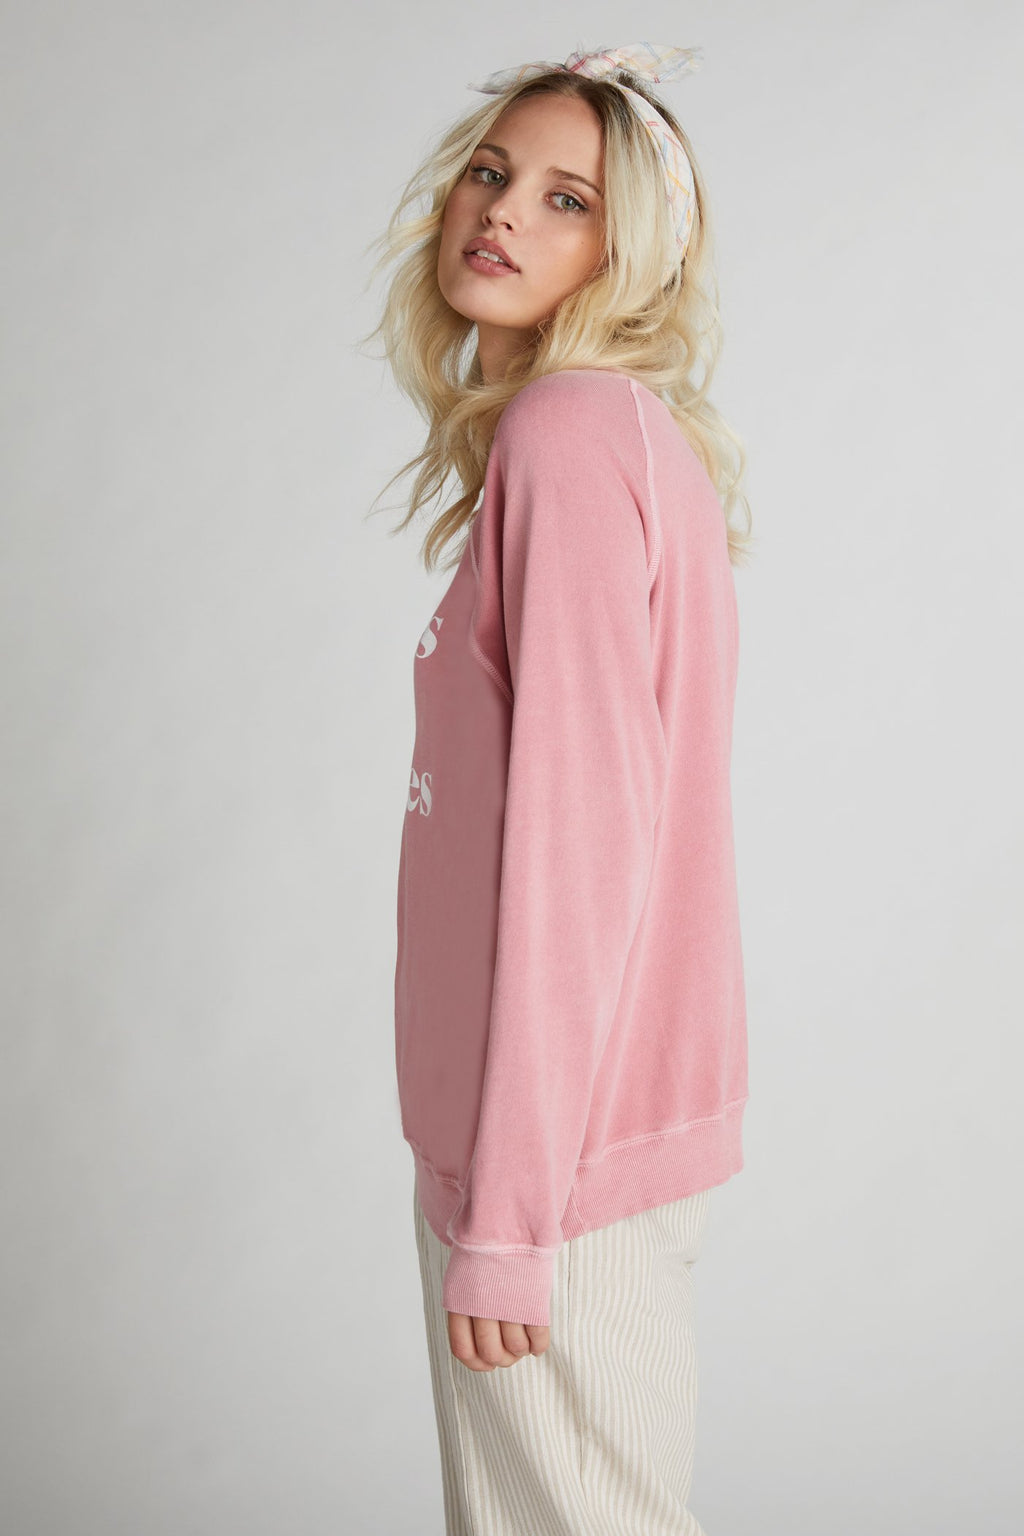 WILDFOX Puppies and Pastries Sommers Sweatshirt